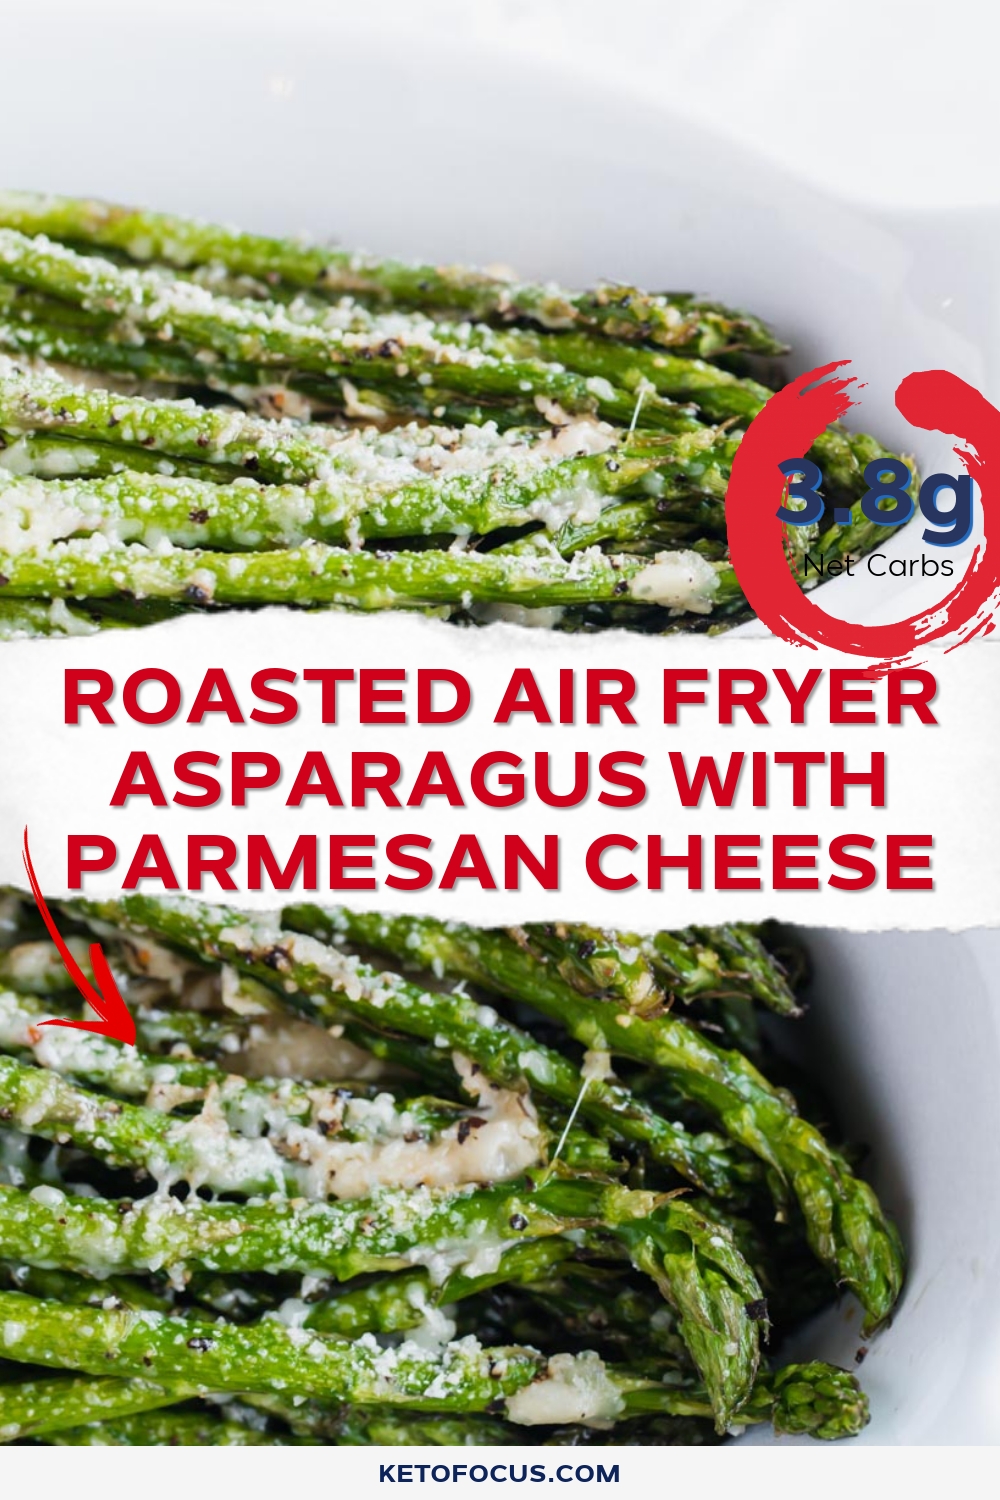 Roasted Air Fryer Asparagus with Parmesan Cheese